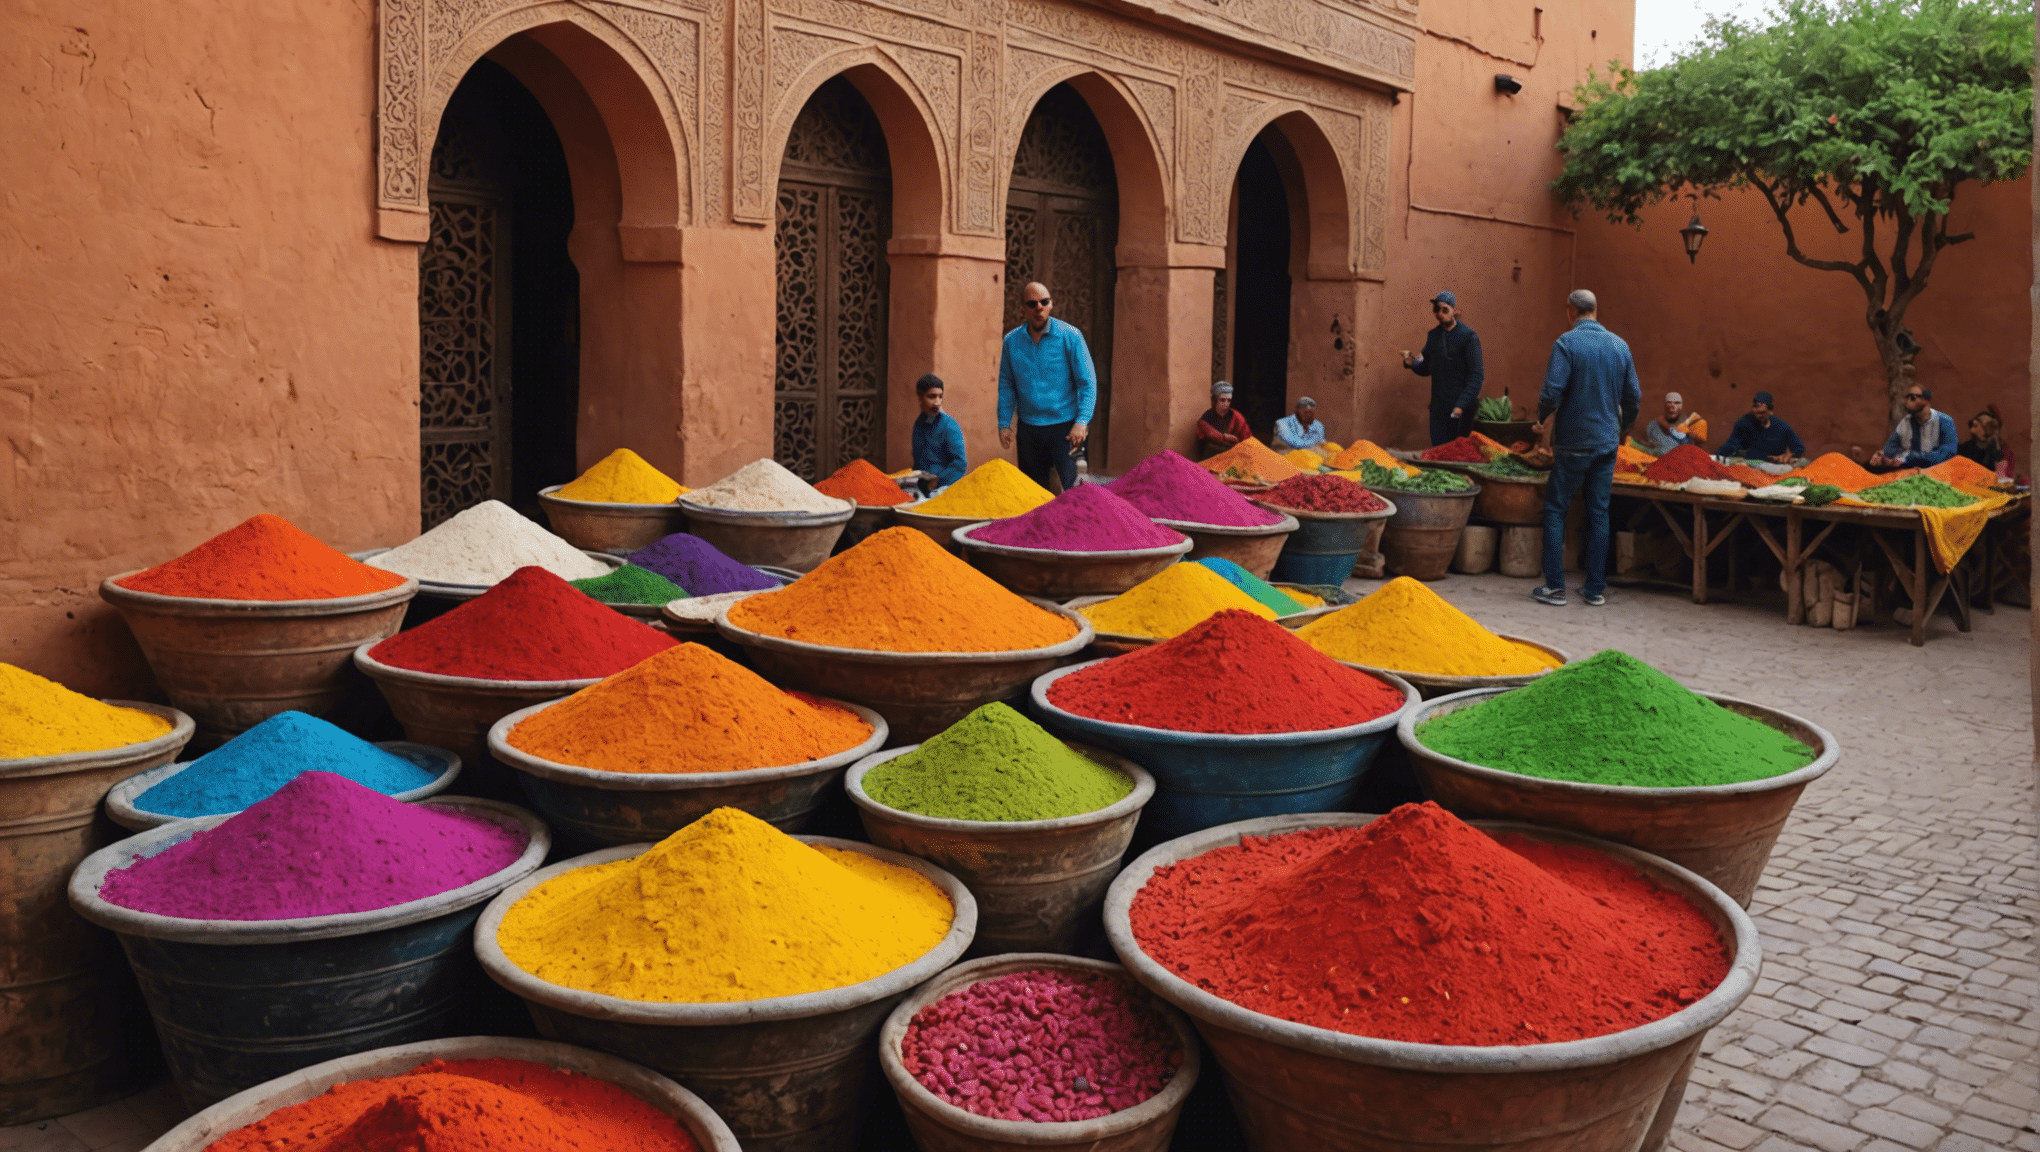 discover fun and family-friendly activities in marrakech with these awesome options!